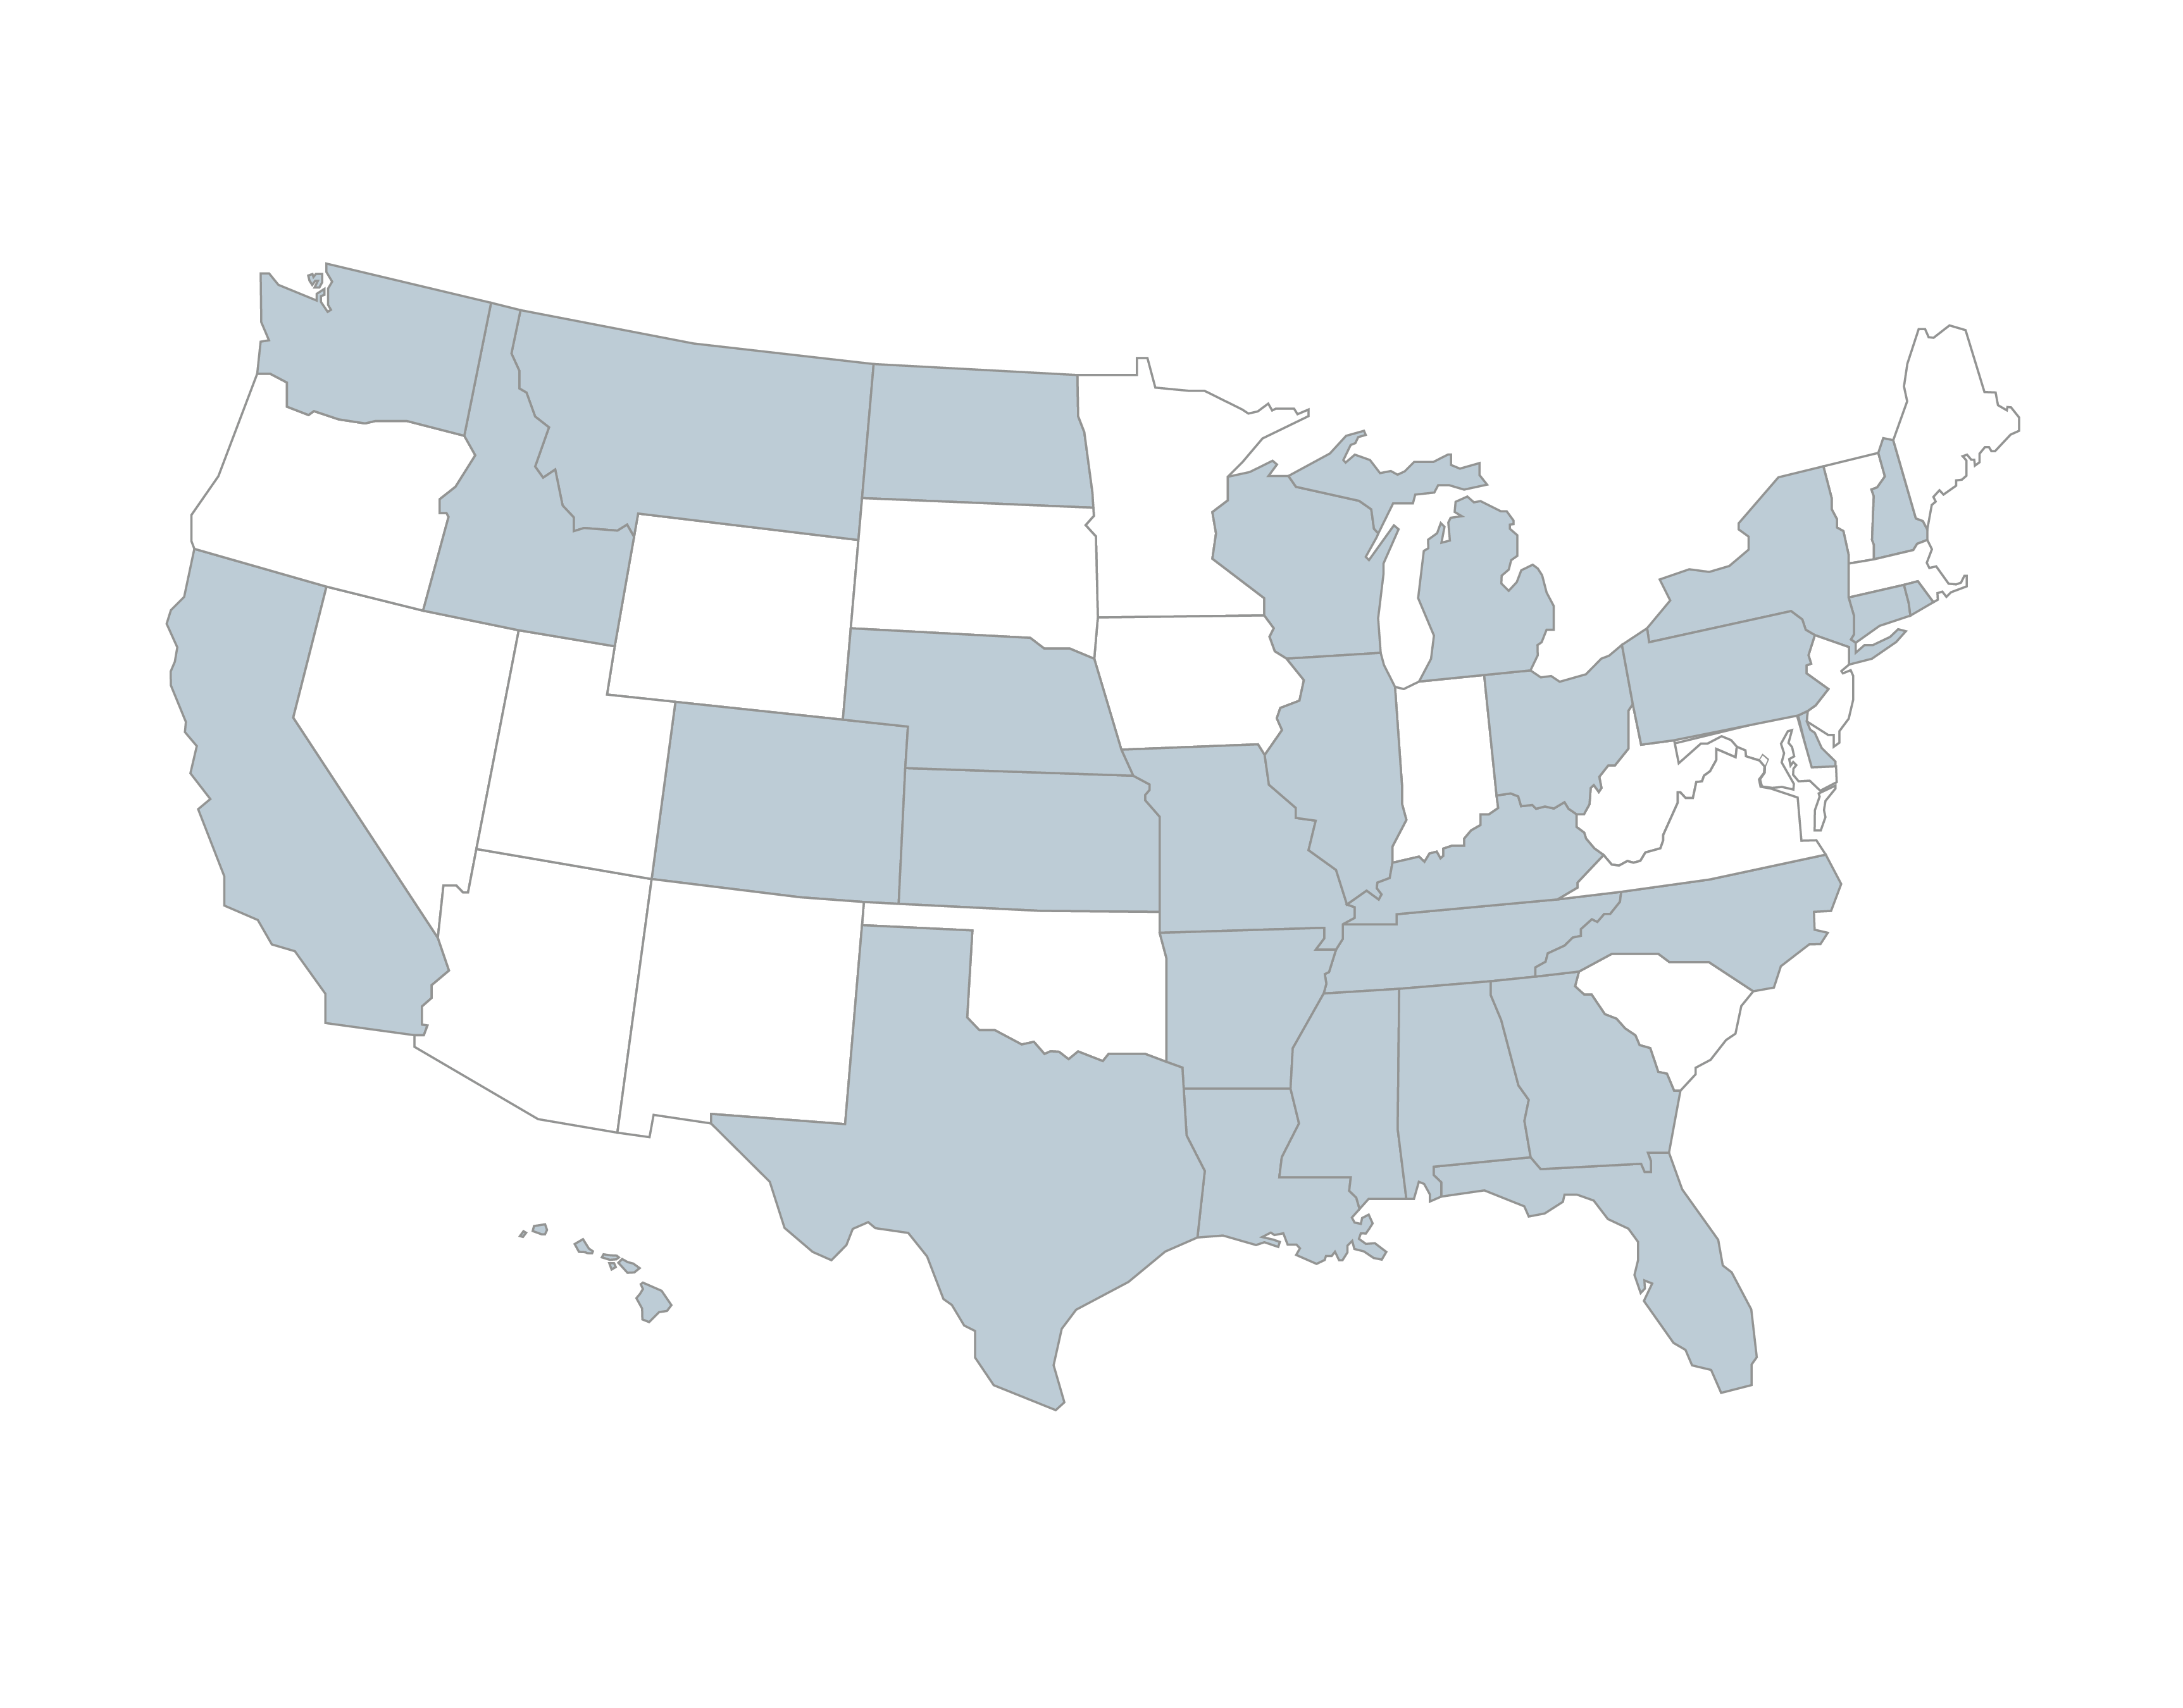 Map of United States with locations highlighted